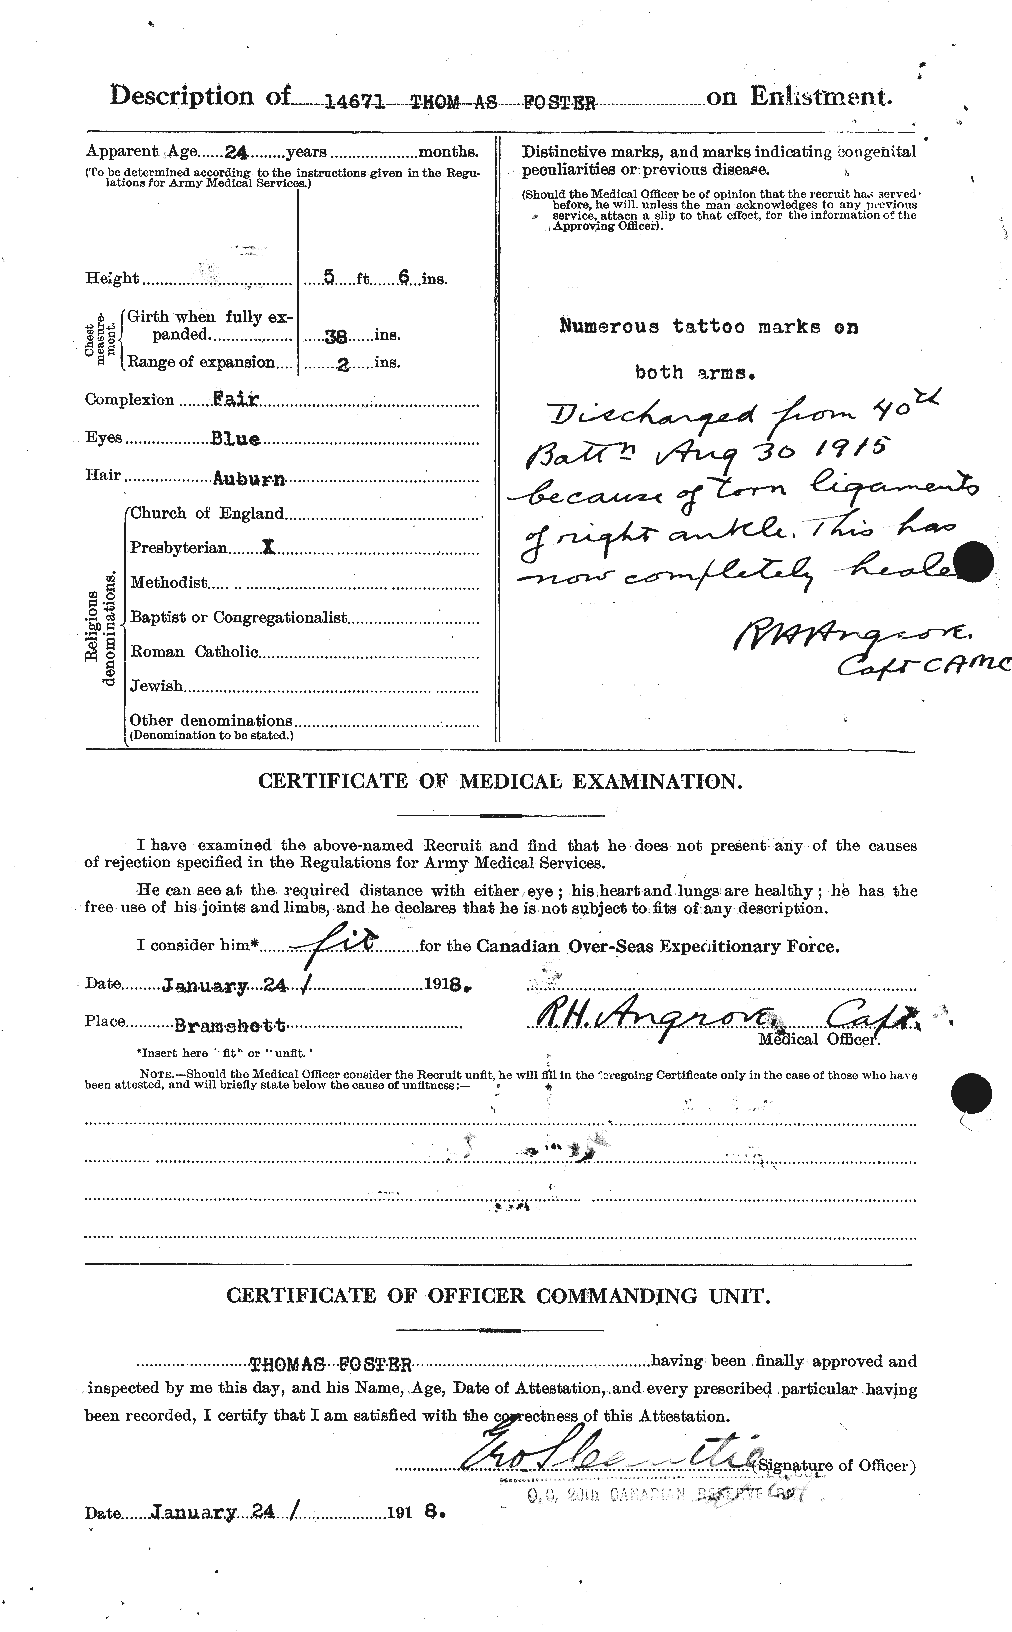 Personnel Records of the First World War - CEF 335223b